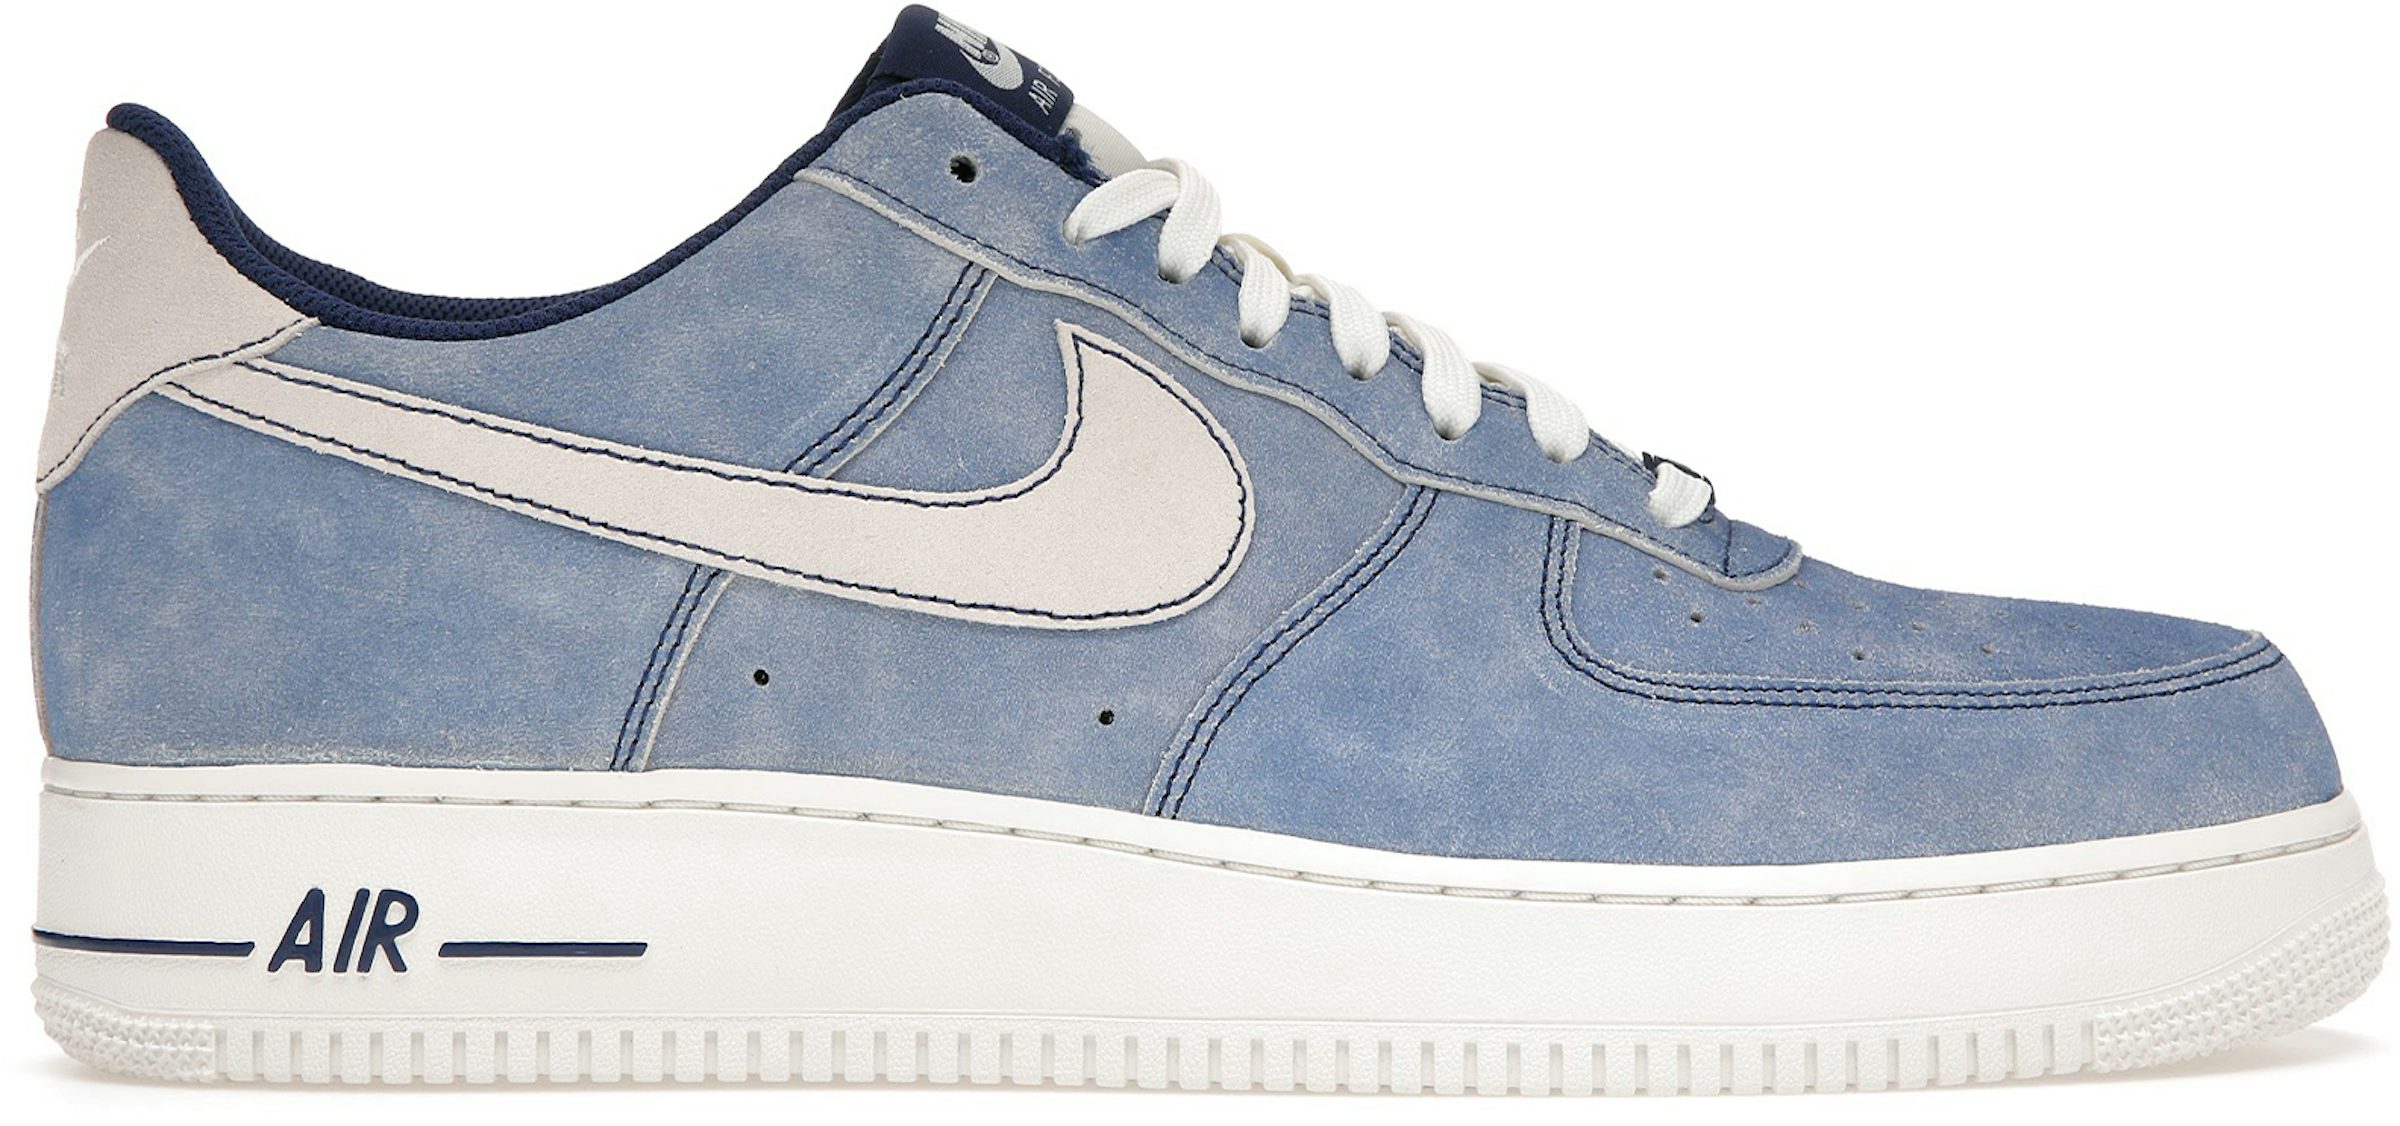 Nike Air Force 1 Low Dusty Blue Suede Men's - DH0265-400 - US